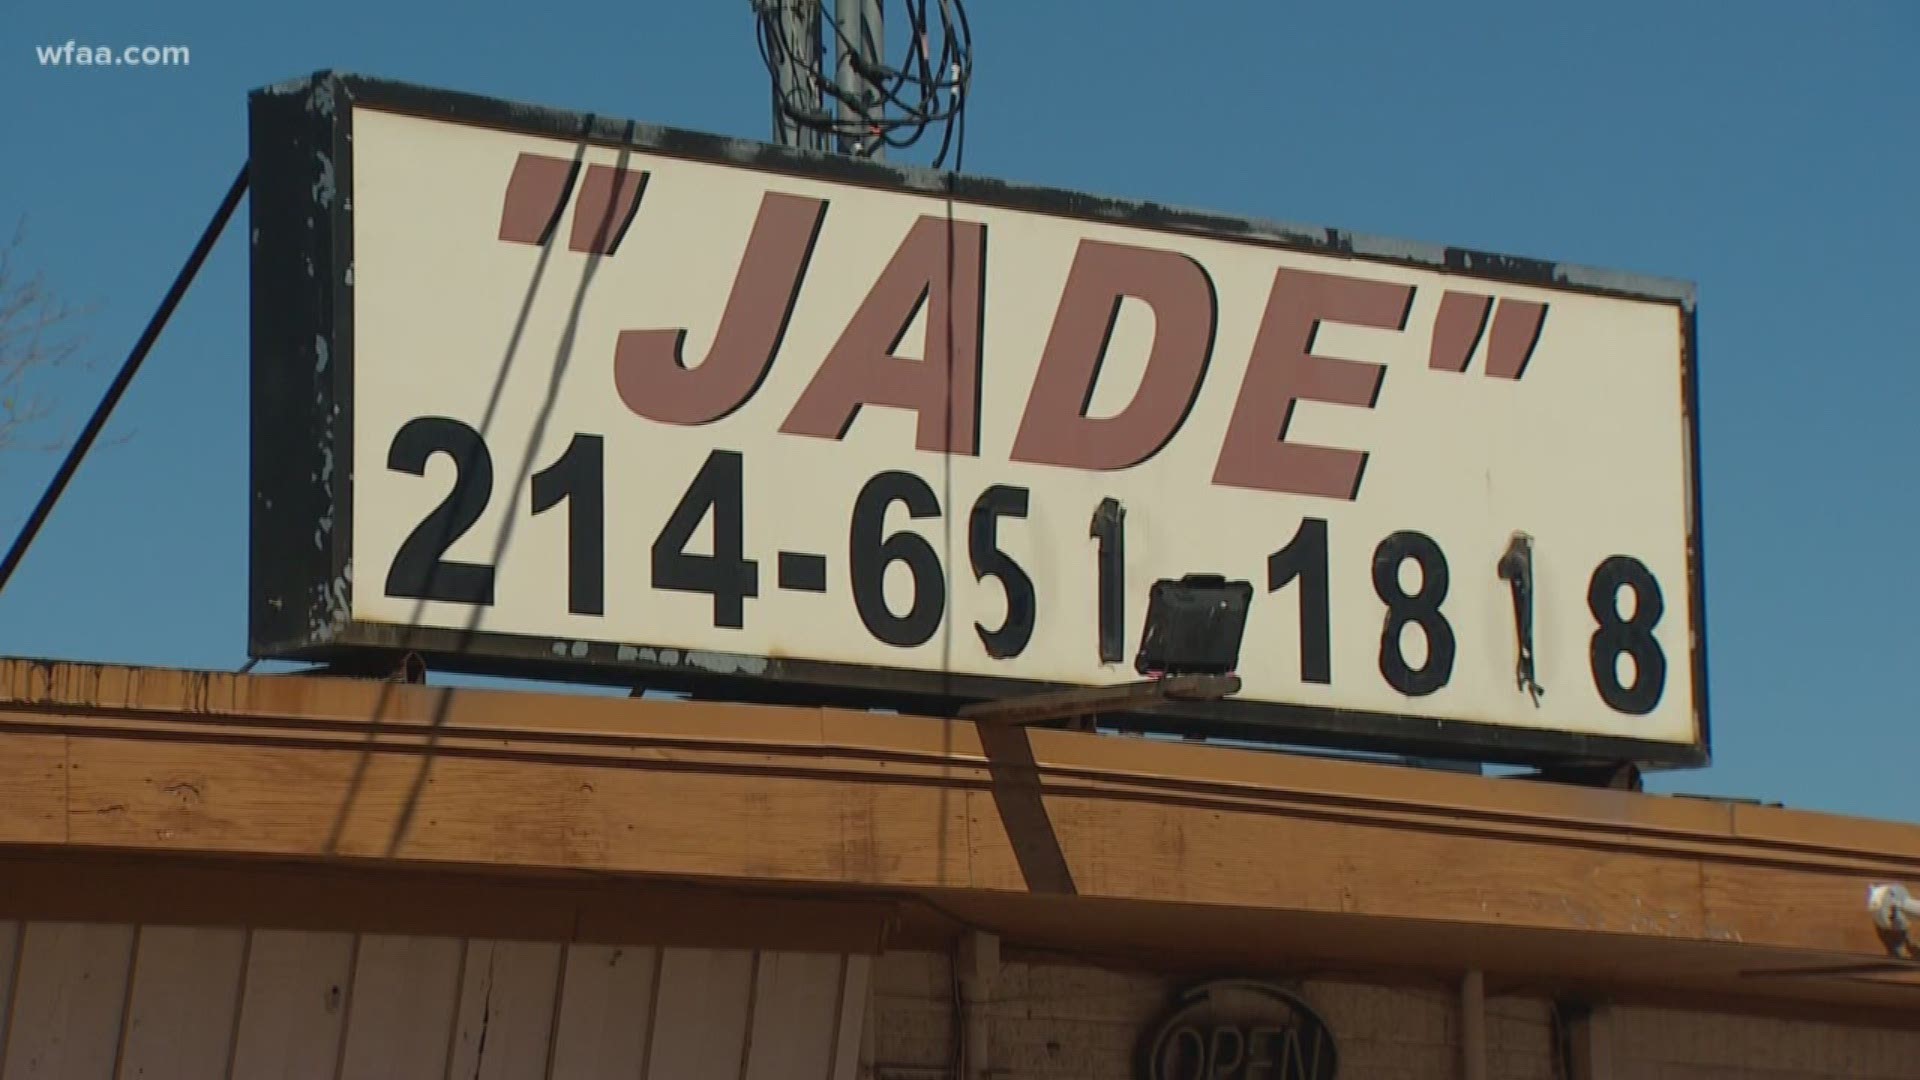 After a months-long investigation into Jade Spa, detectives with the Dallas Police Department vice unit said they confirmed prostitution was going on inside the spa.